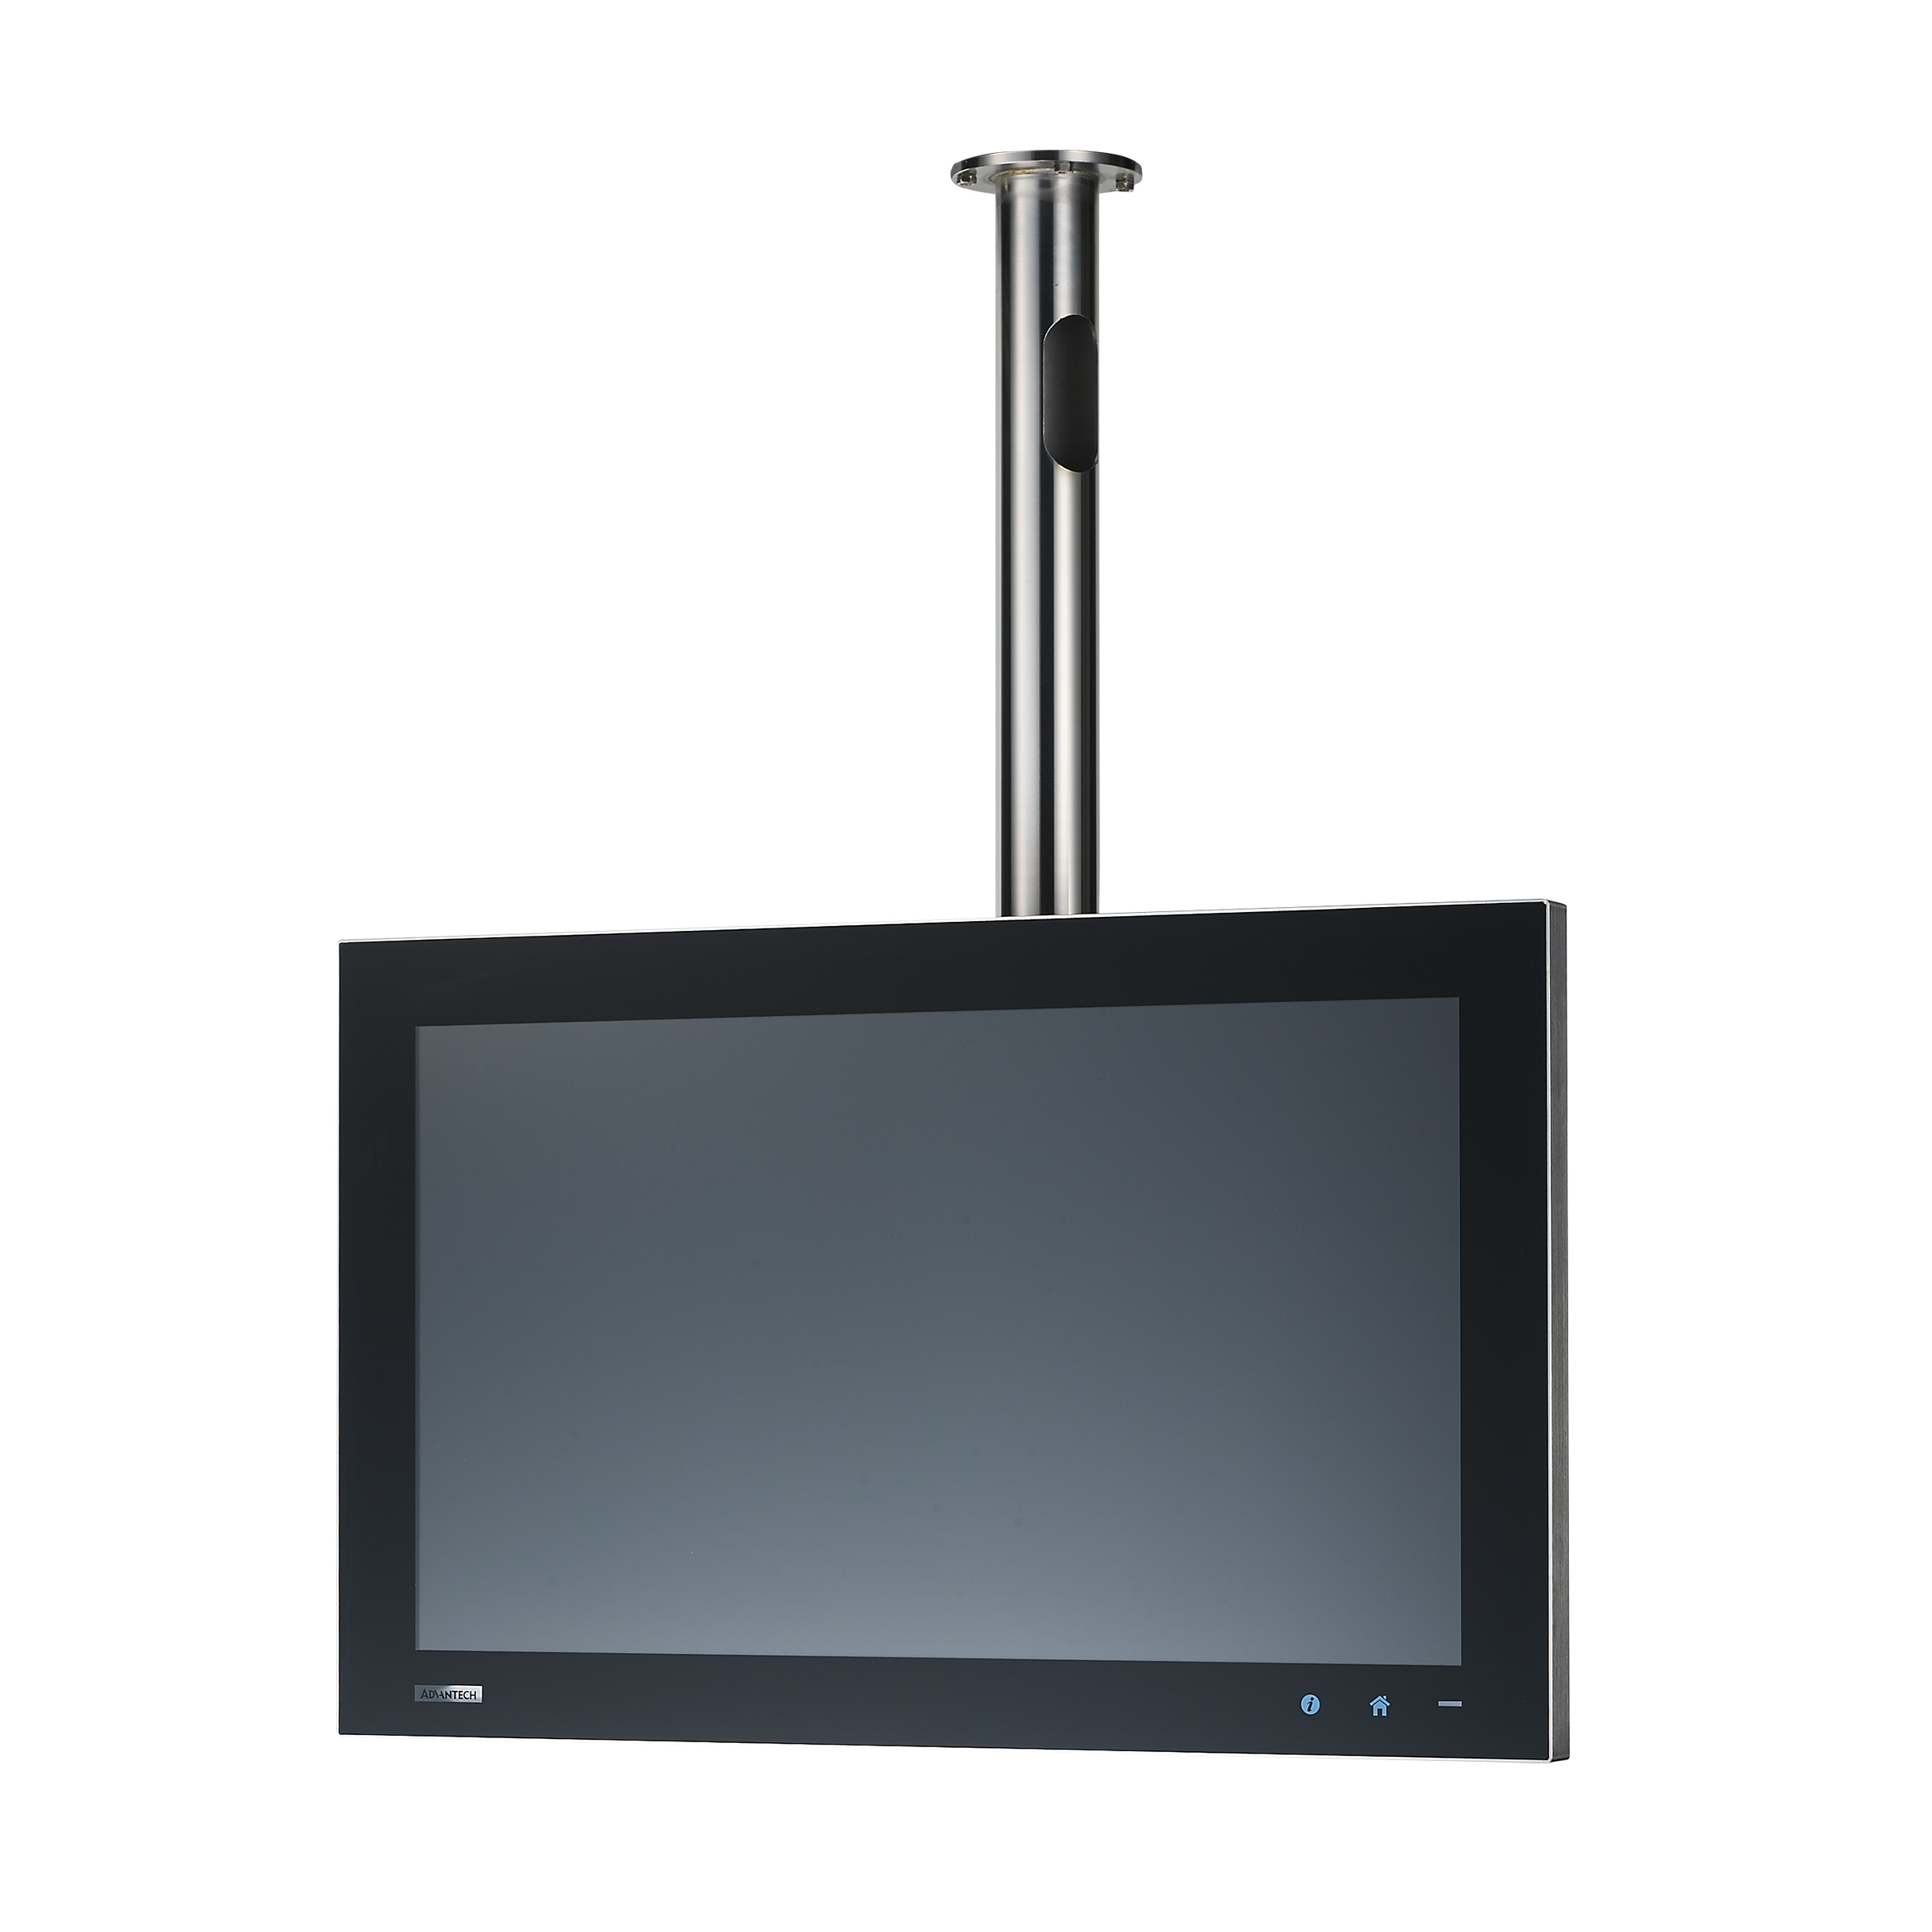 21.5" Full HD TFT LED LCD IndustrialMulti-Touch Panel PC Stainless Steelchassis with IP69K Rated